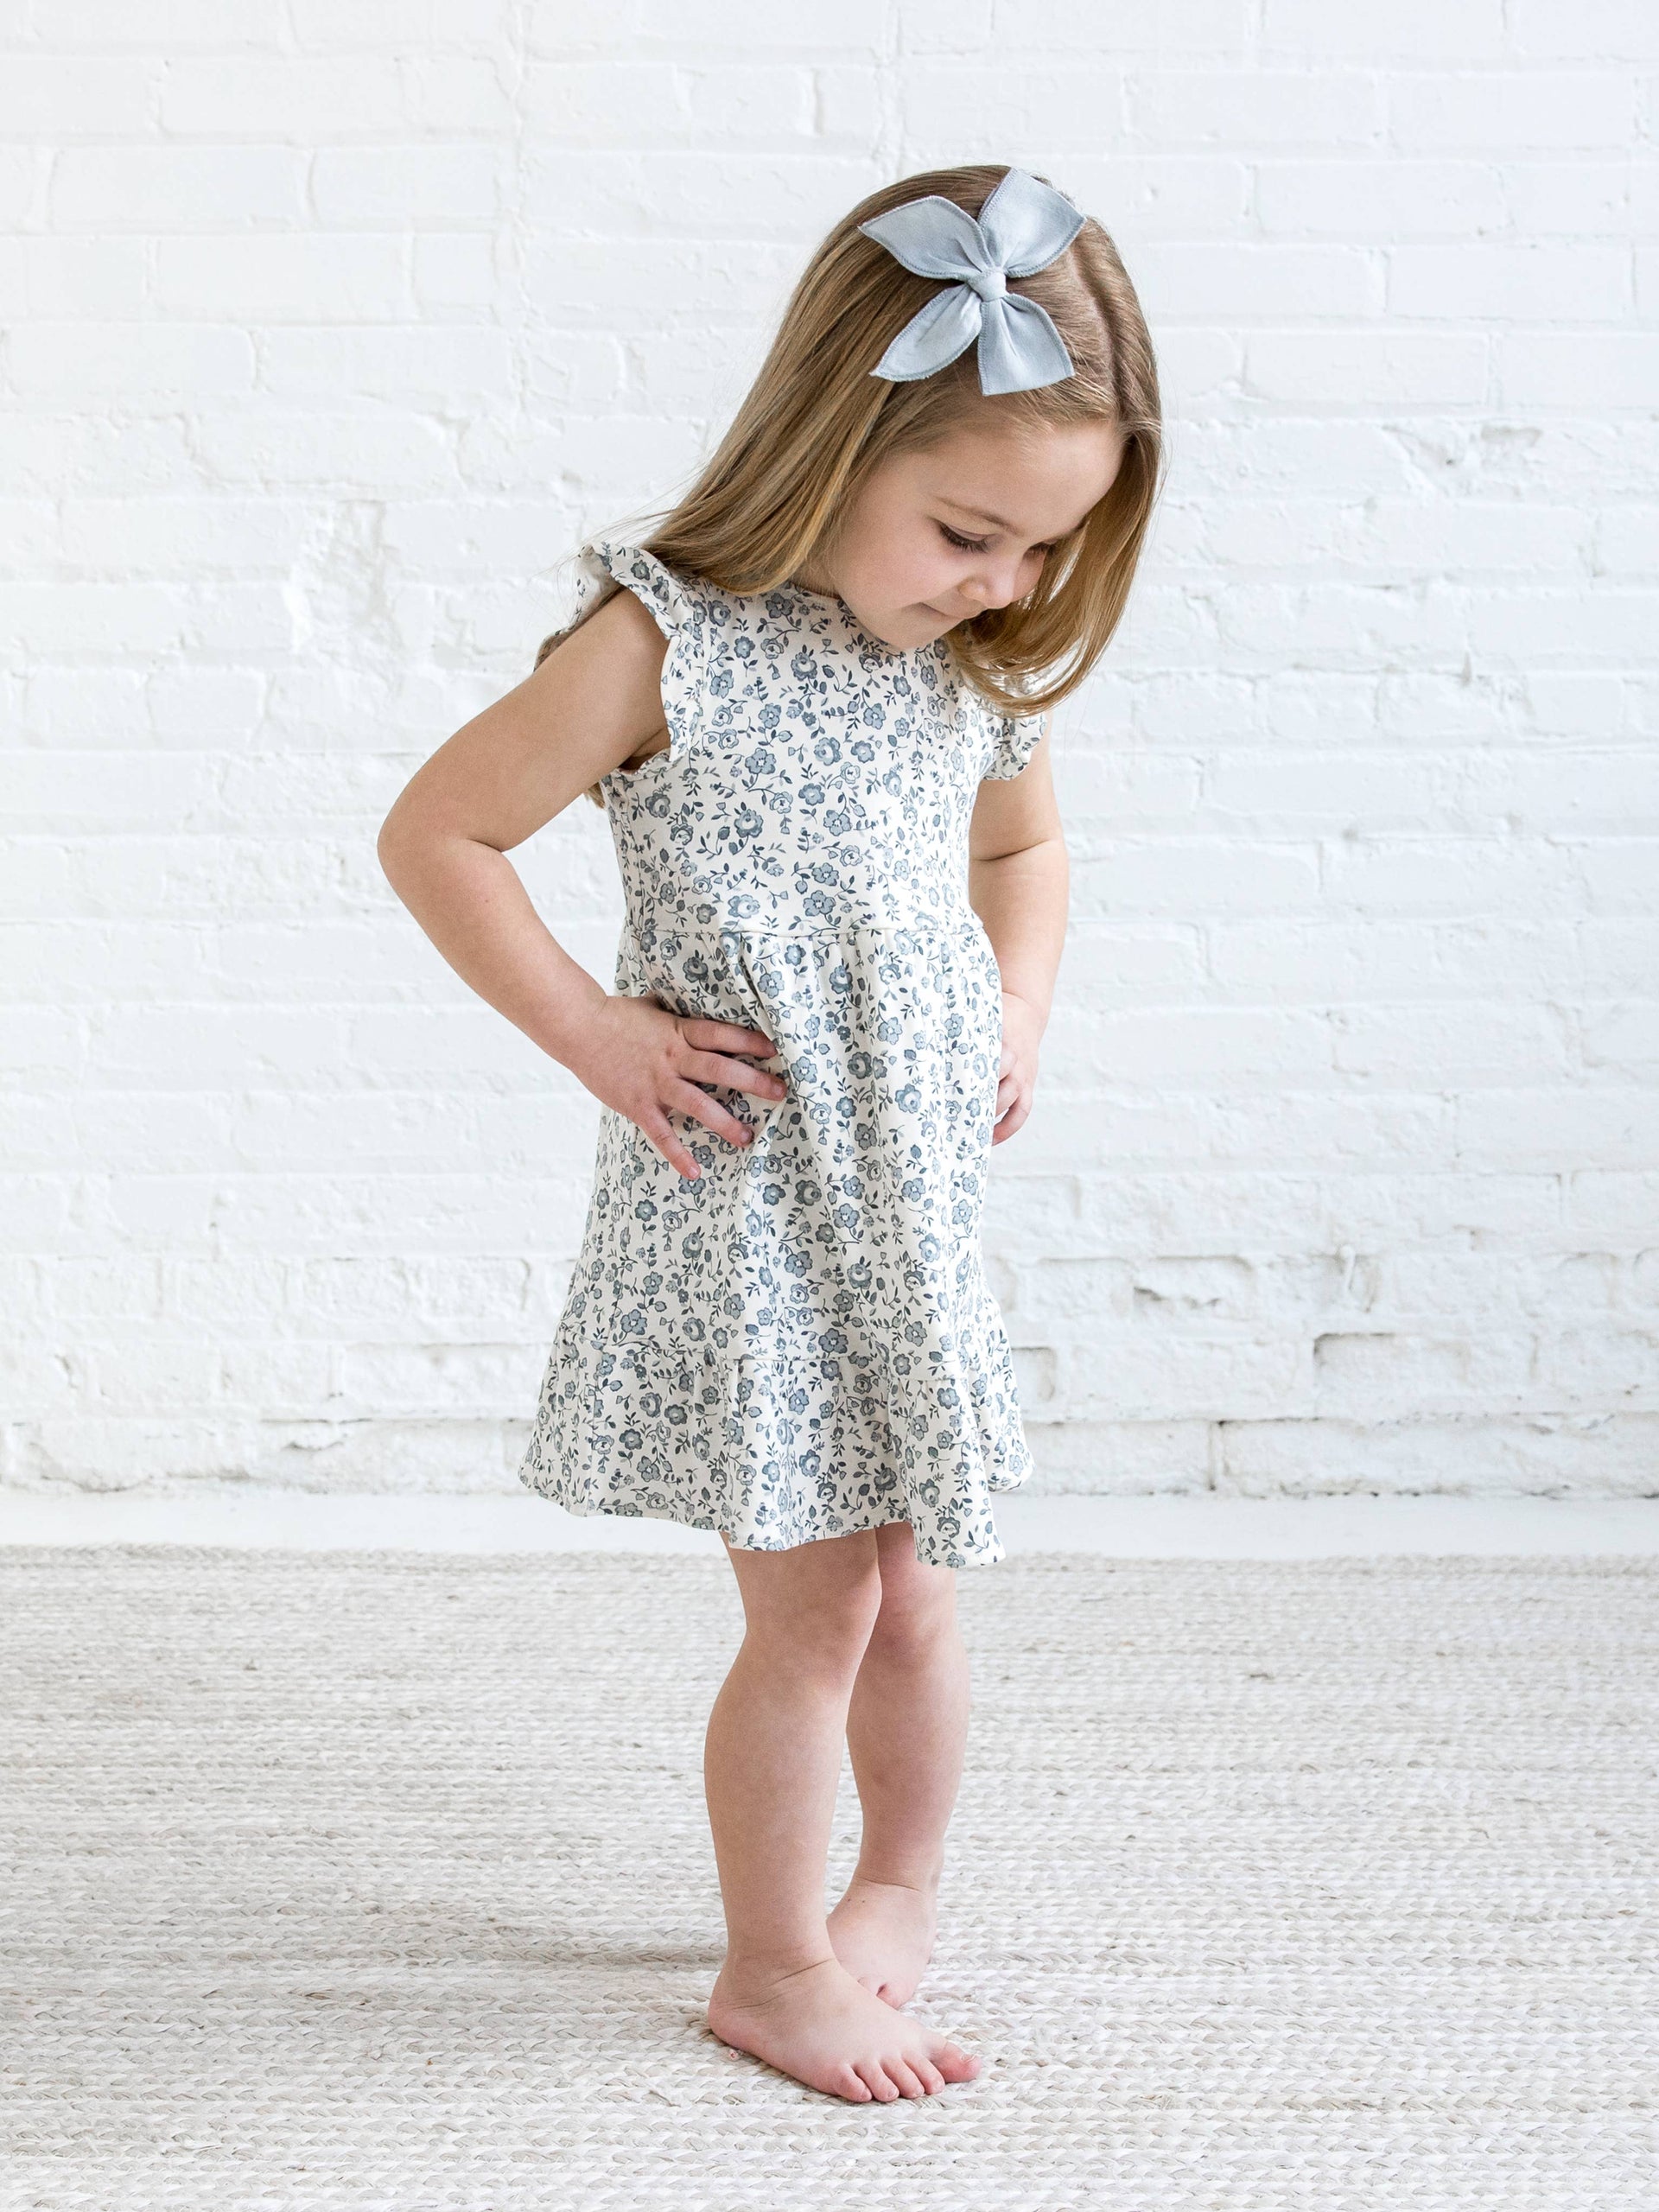 Colored Organics - Organic Baby & Kids Tilly Tiered Dress - Lena Floral: 5T/6